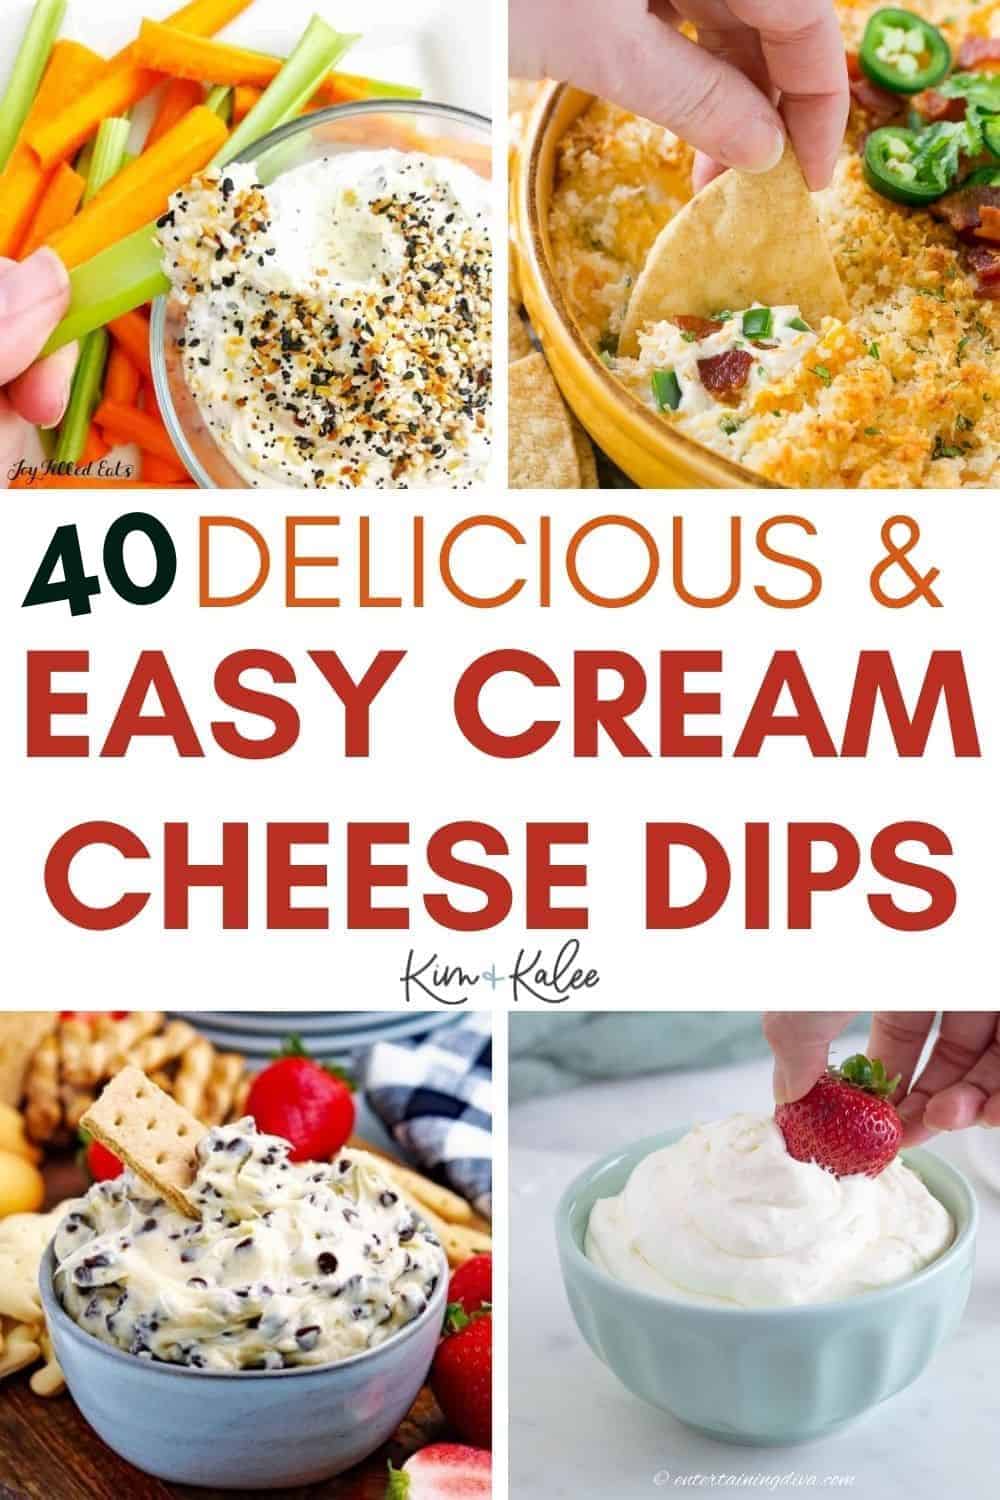 collage of 4 different recipes - text overlay in the middle says 40 delicious easy cream cheese dips